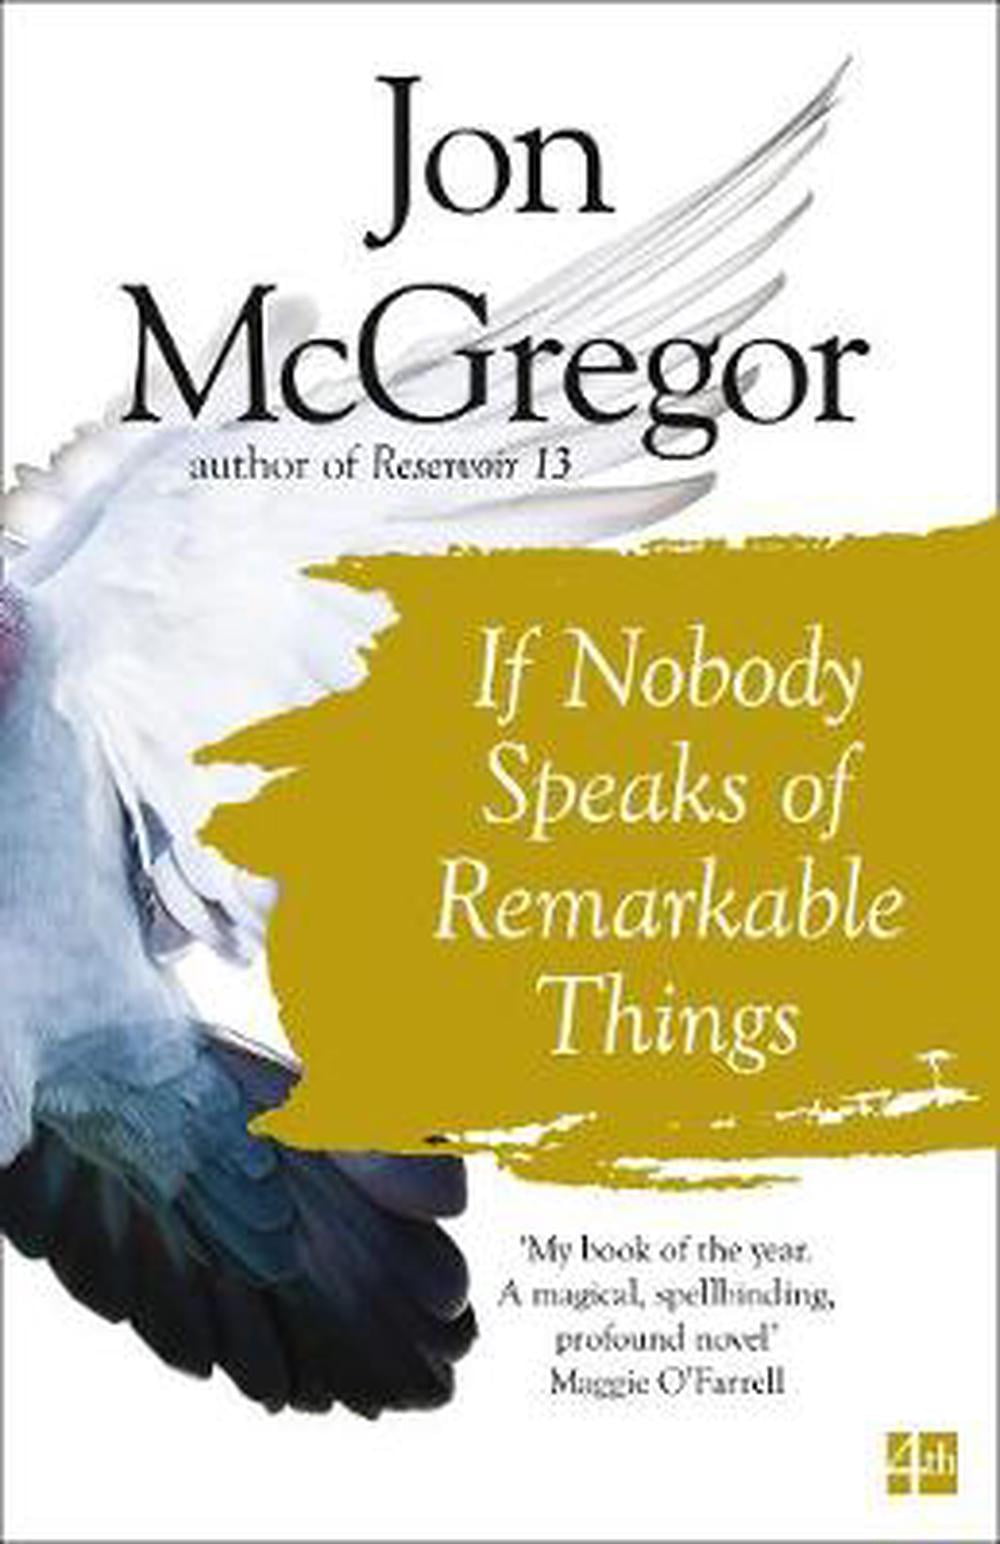 book review if nobody speaks remarkable things